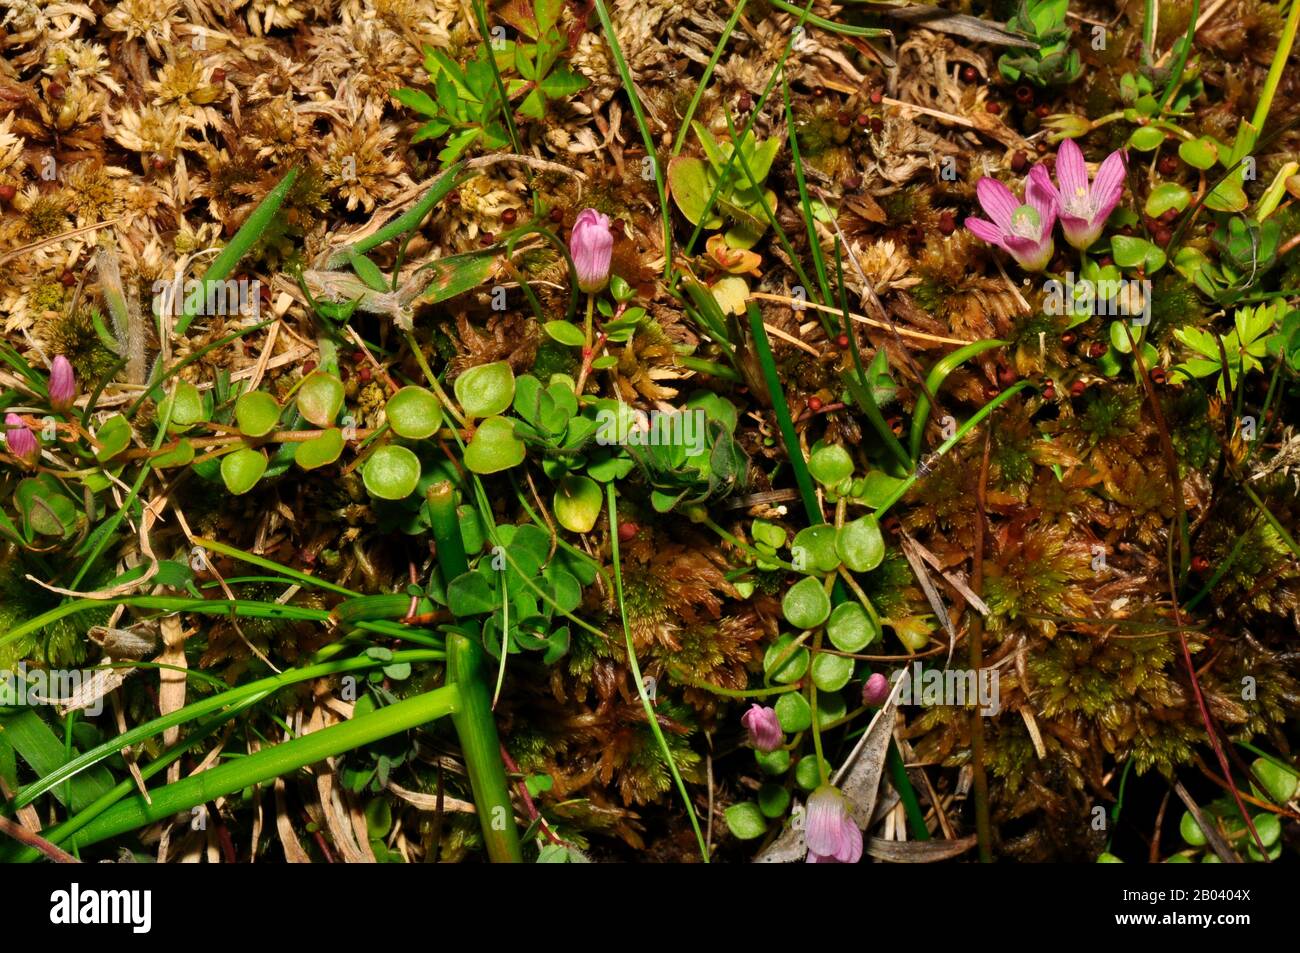 Bog Pimpernel 'Anagallis tenella' funnel shaped pale pink flowers,close up,found in bogs and damp grassy places, acid soil, Flowers open in sunshine, Stock Photo